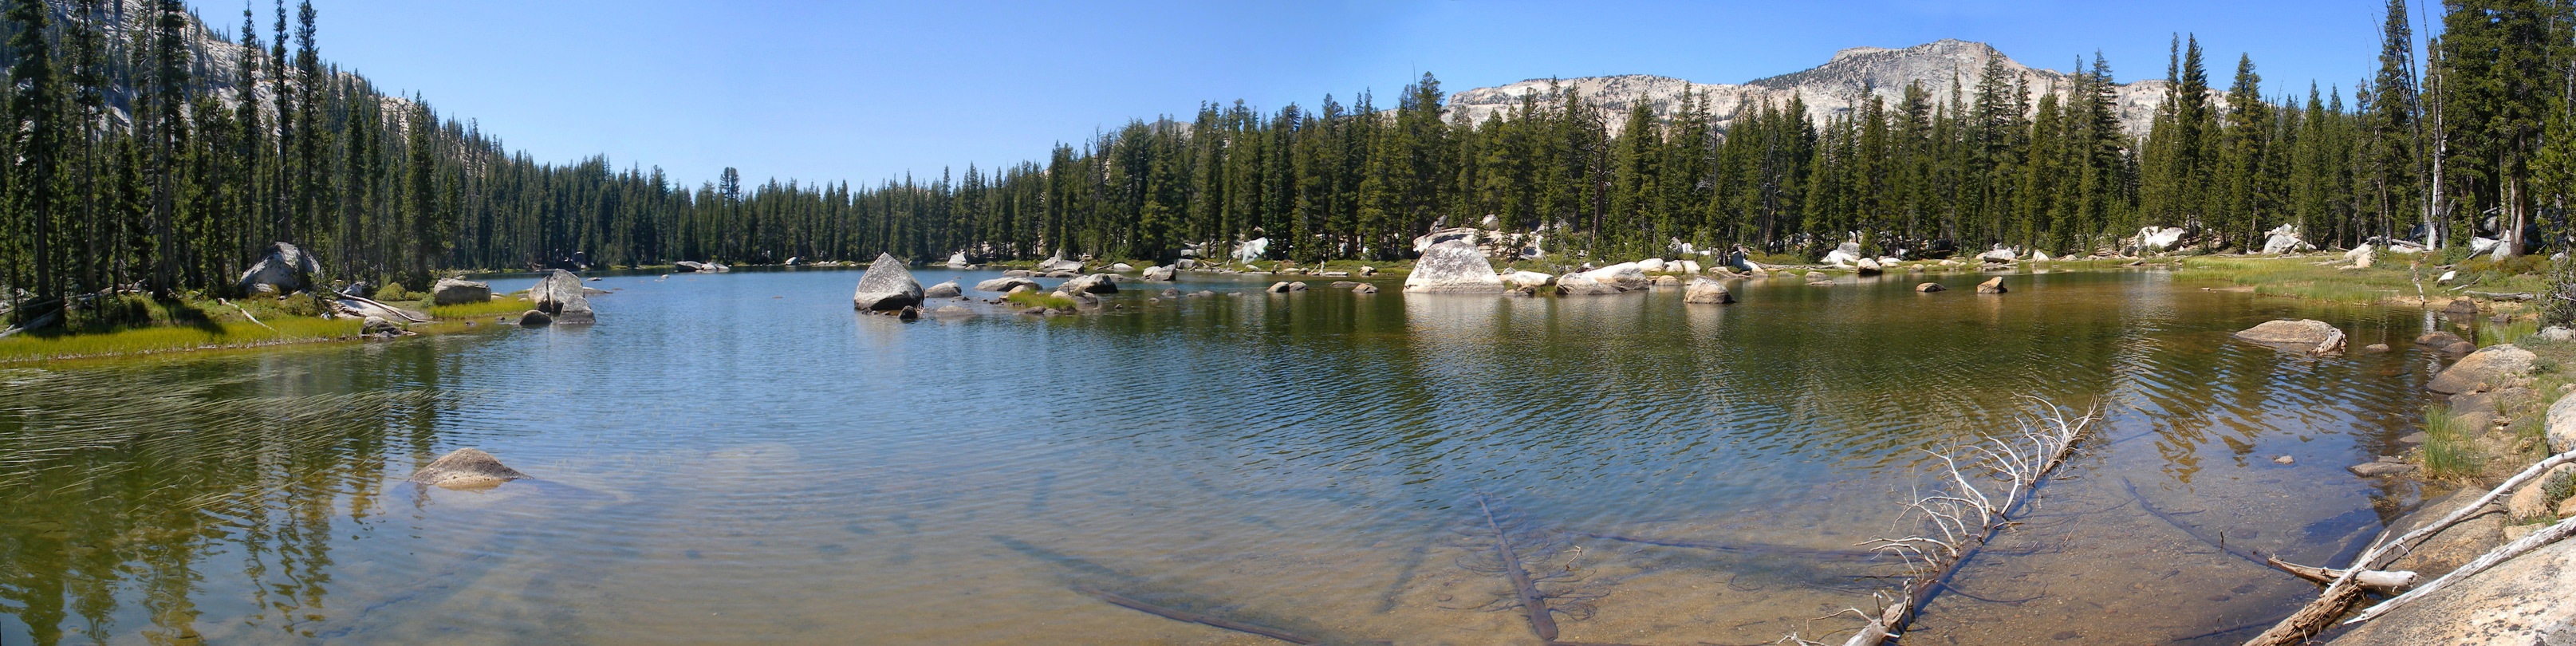 Largest of the Polly Dome Lakes